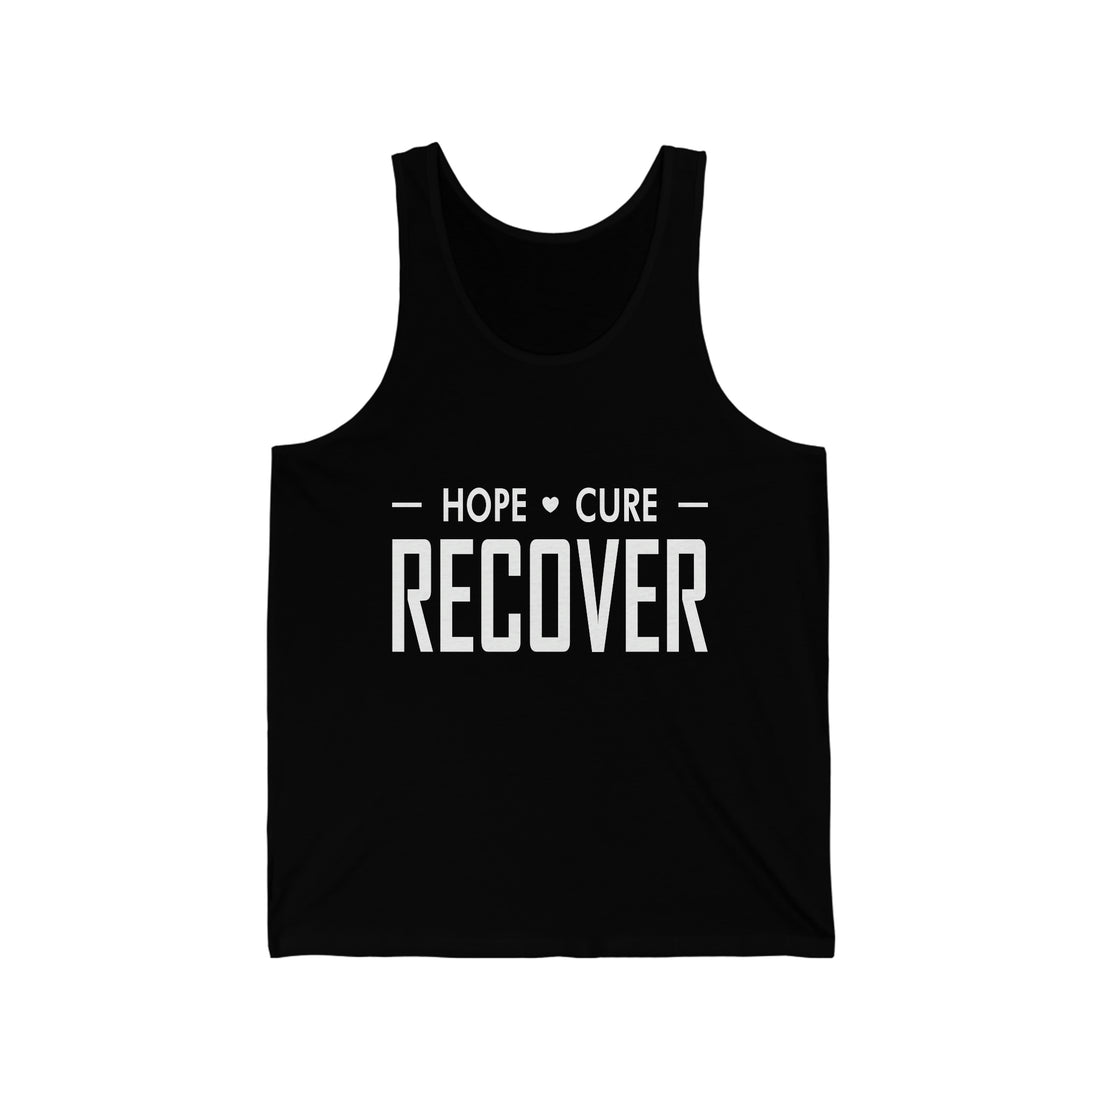 Hope Cure Recover - Unisex Jersey Tank Top